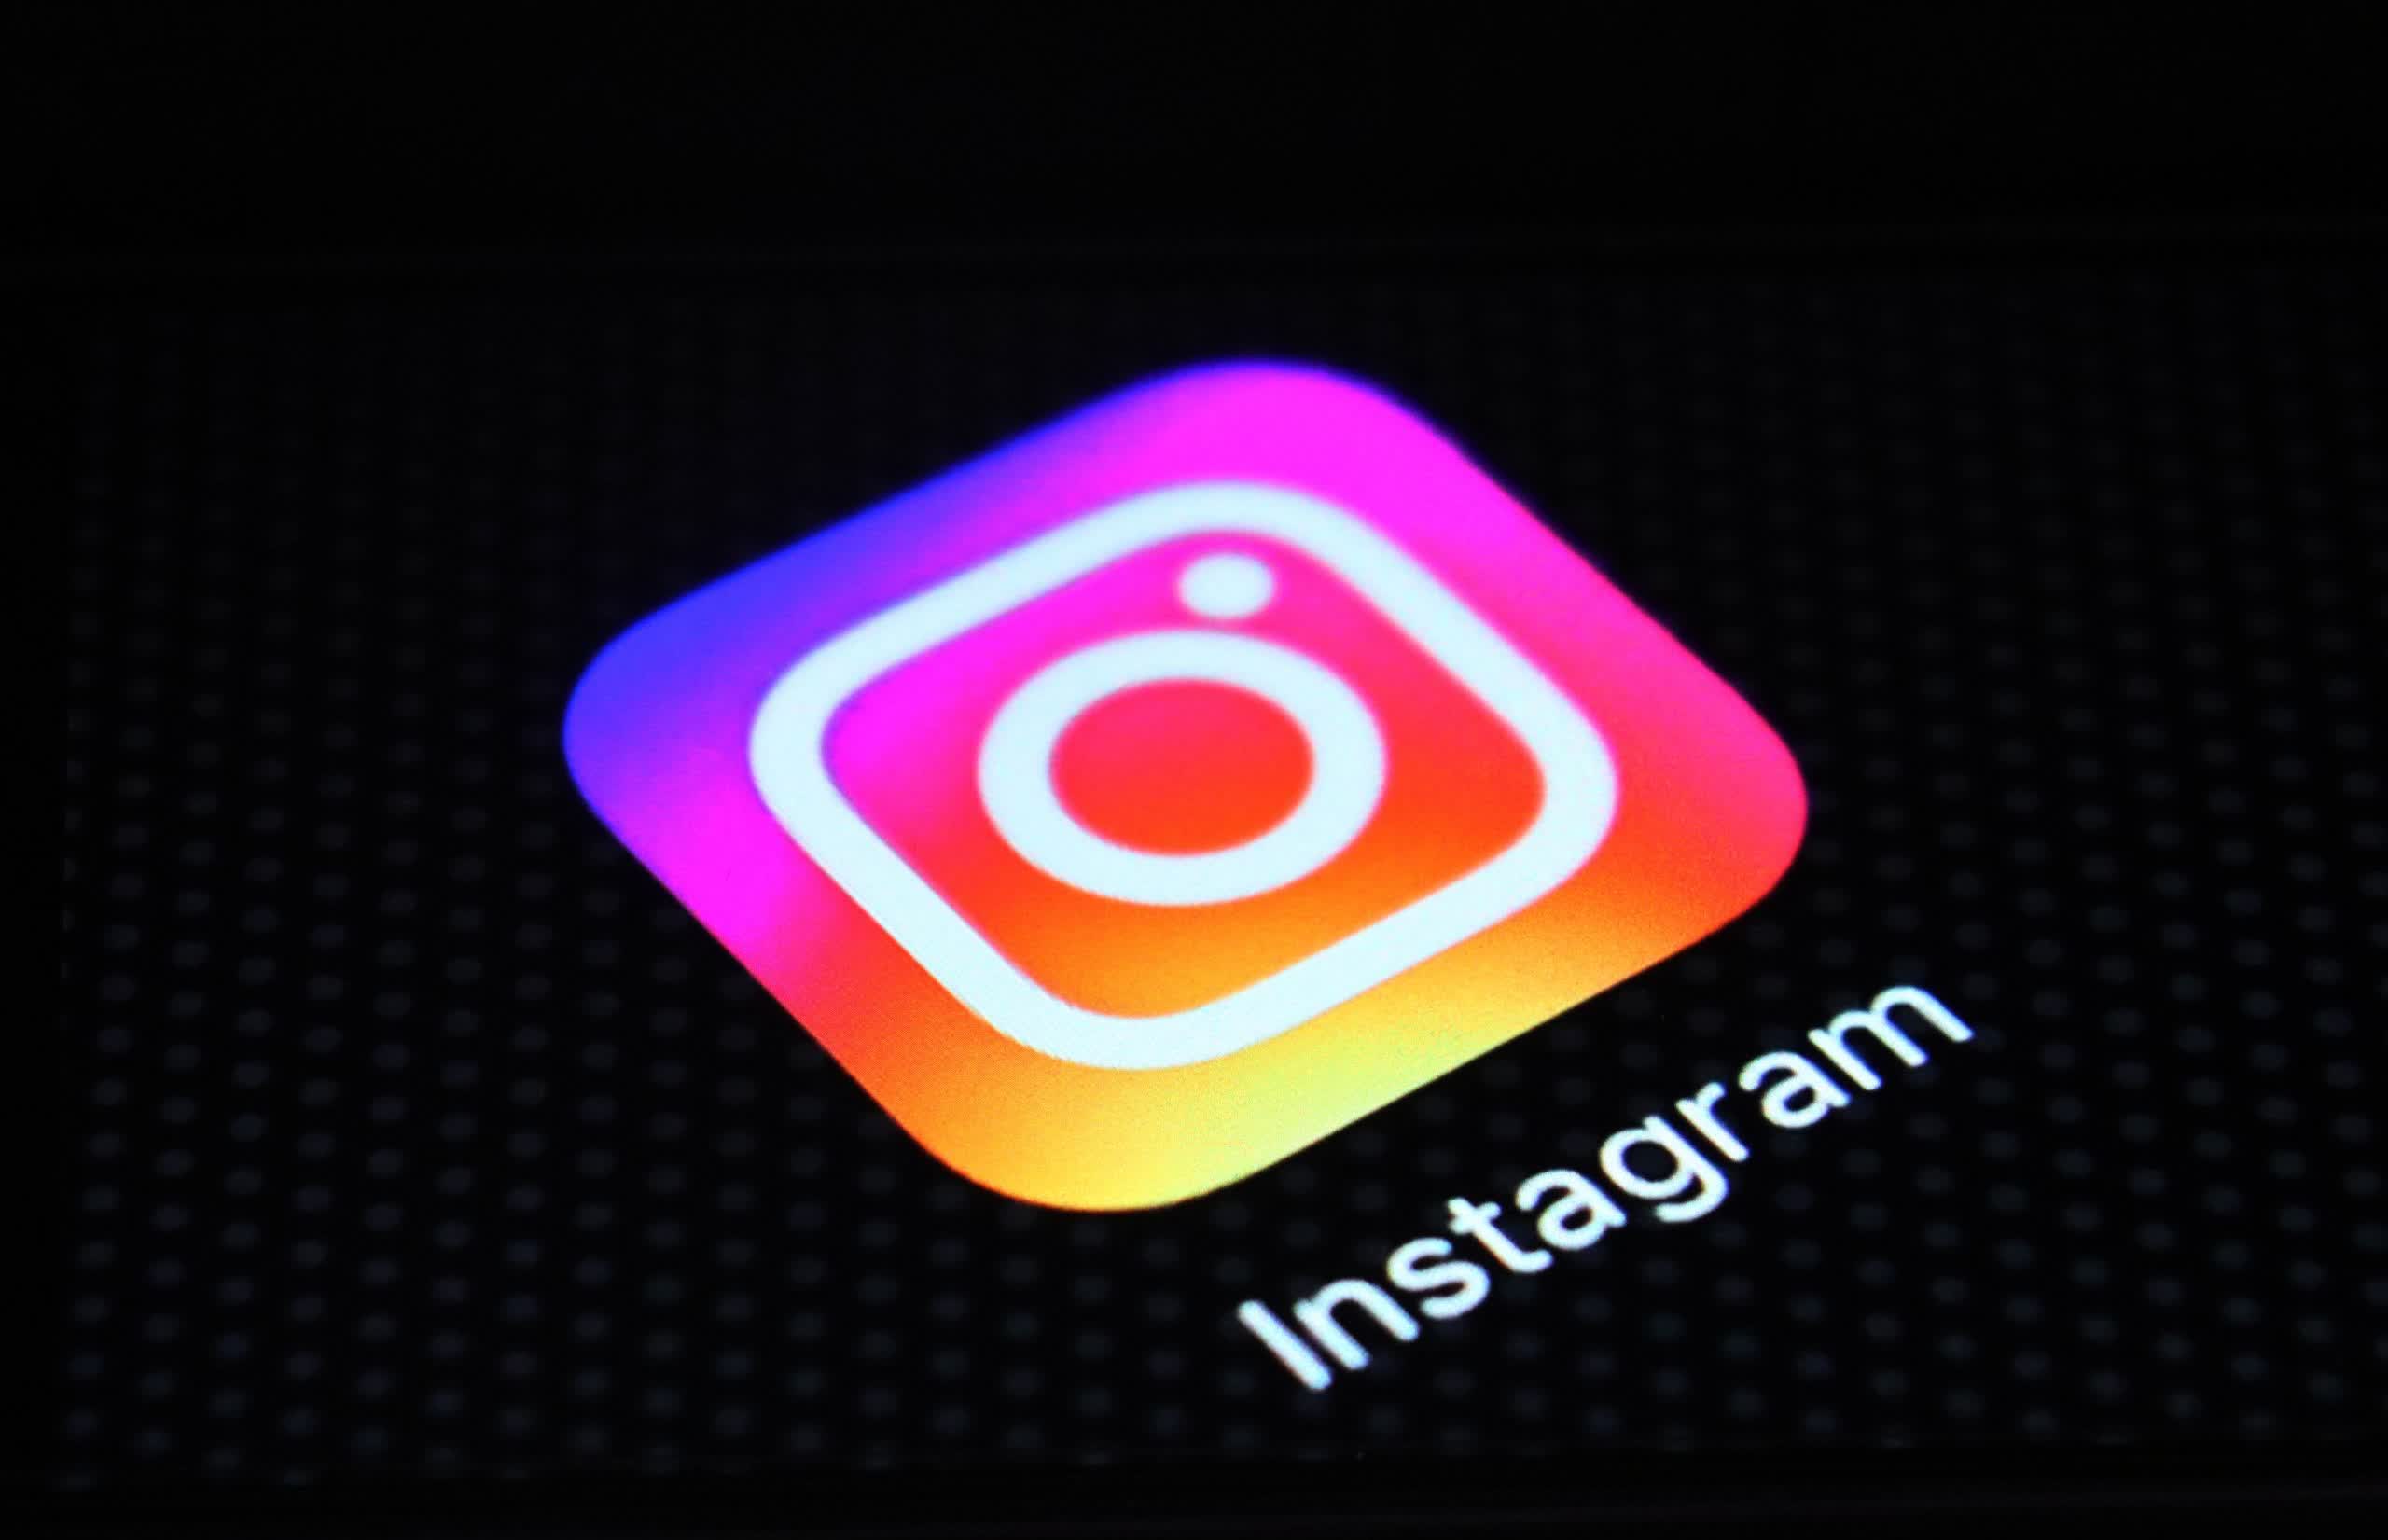 Numerous Instagram users report account suspensions after morning outage